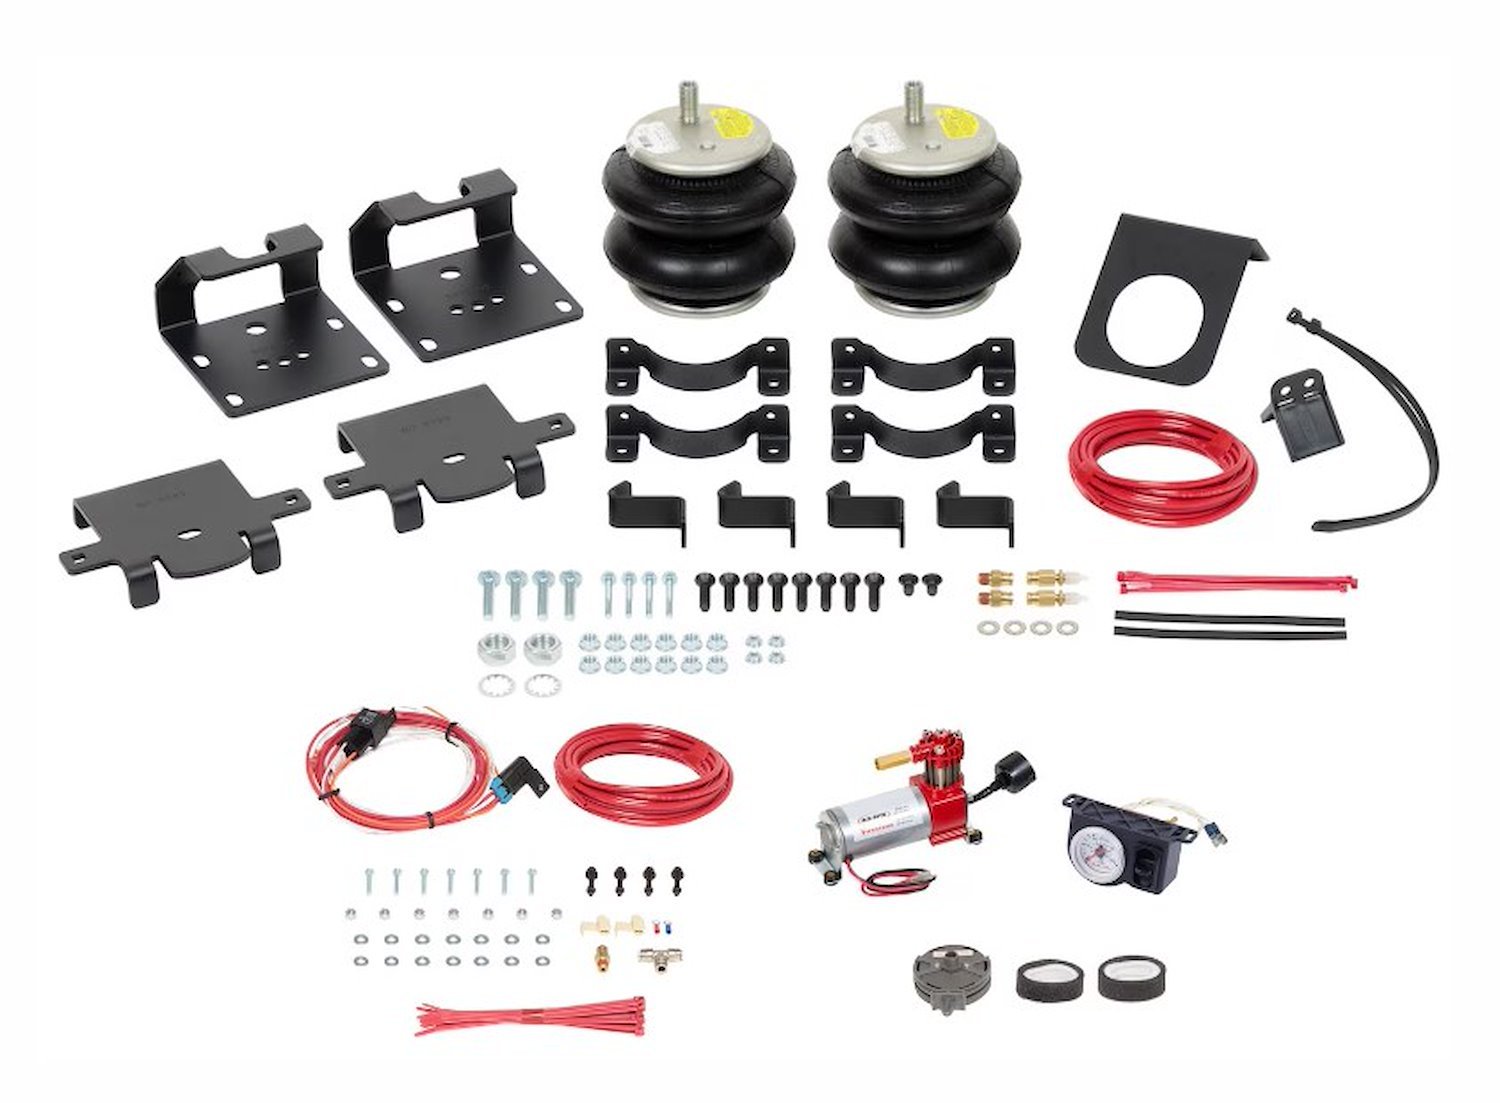 2825 Ride-Rite Analog All-In-One Spring Kit Fits Select